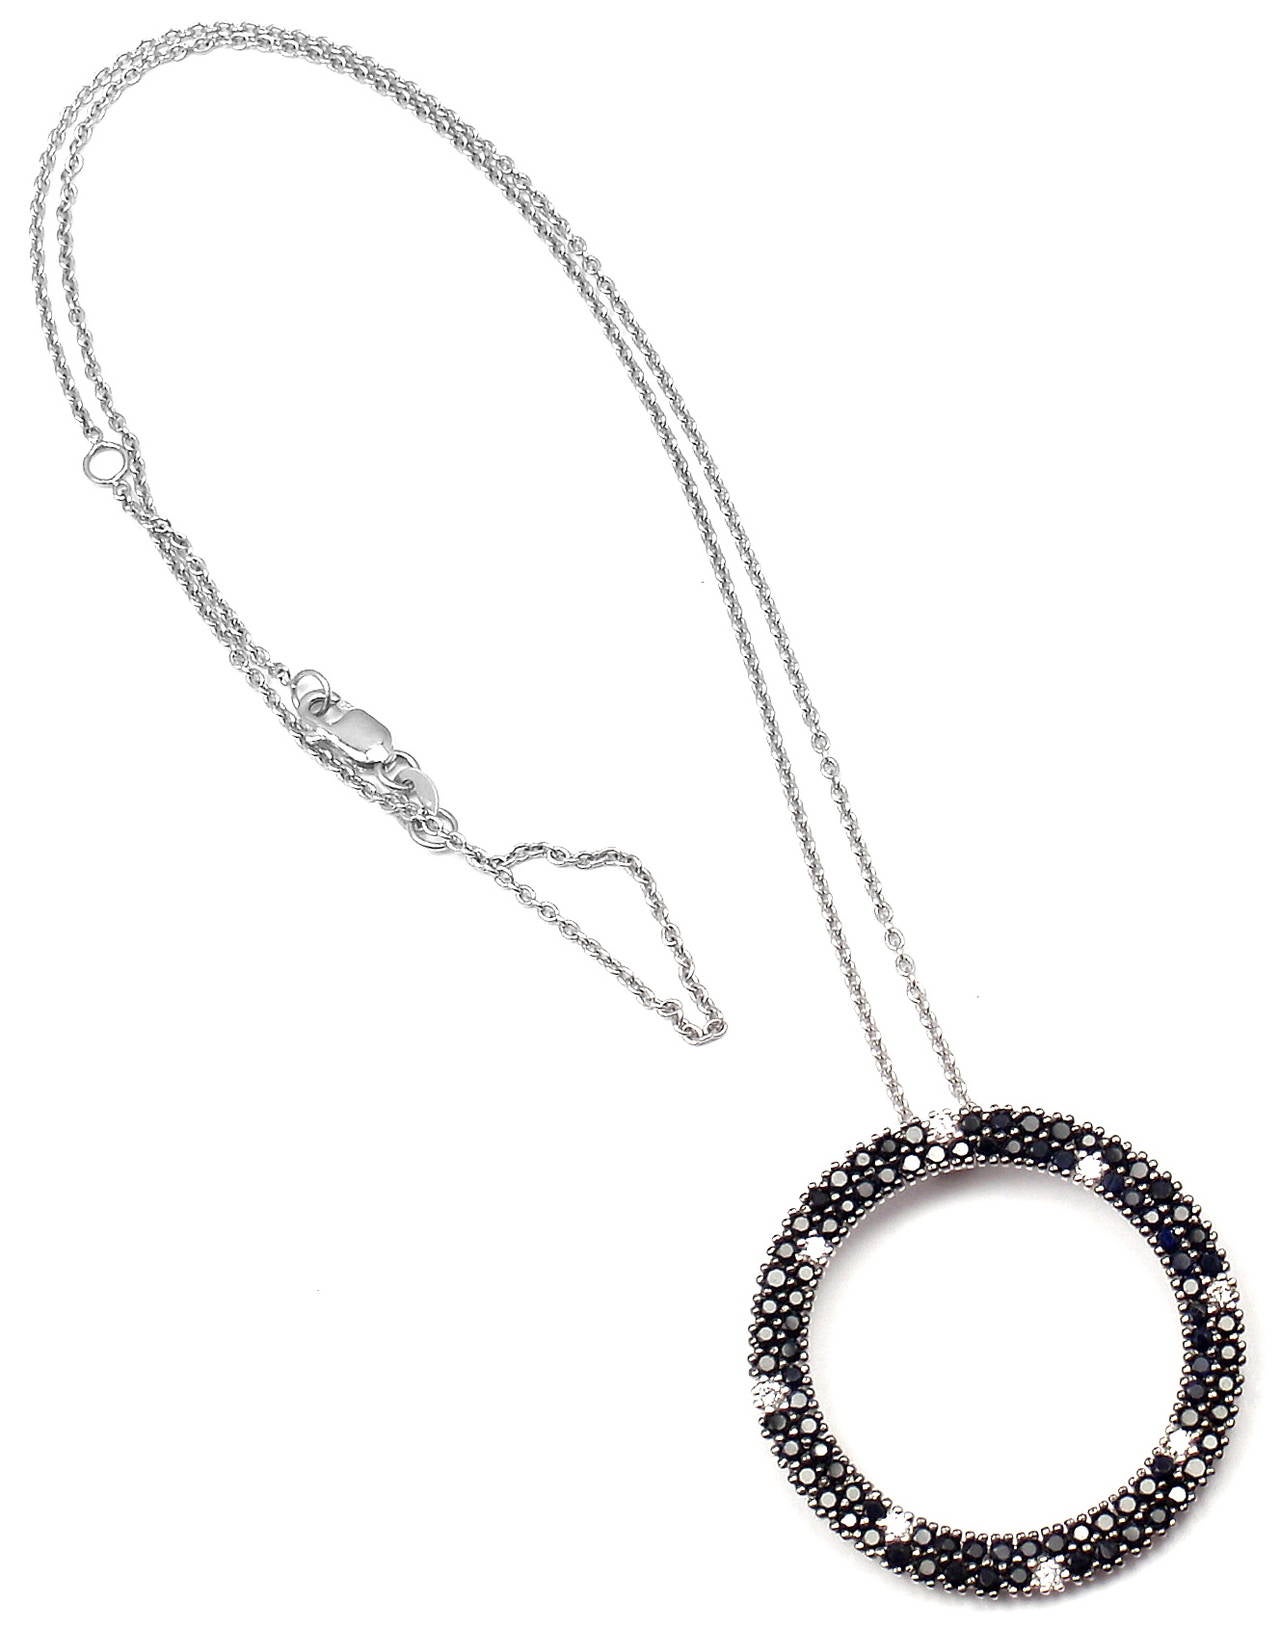 18k White Gold Fantasia Diamond Black Sapphire Pendant Necklace by Roberto Coin. 
With 8 round brilliant cut diamonds SI1 clarity, G color total weight .26ct
2ct in round black sapphires

Details: 
Necklace: 17.5'' inches long
Pendant:  1